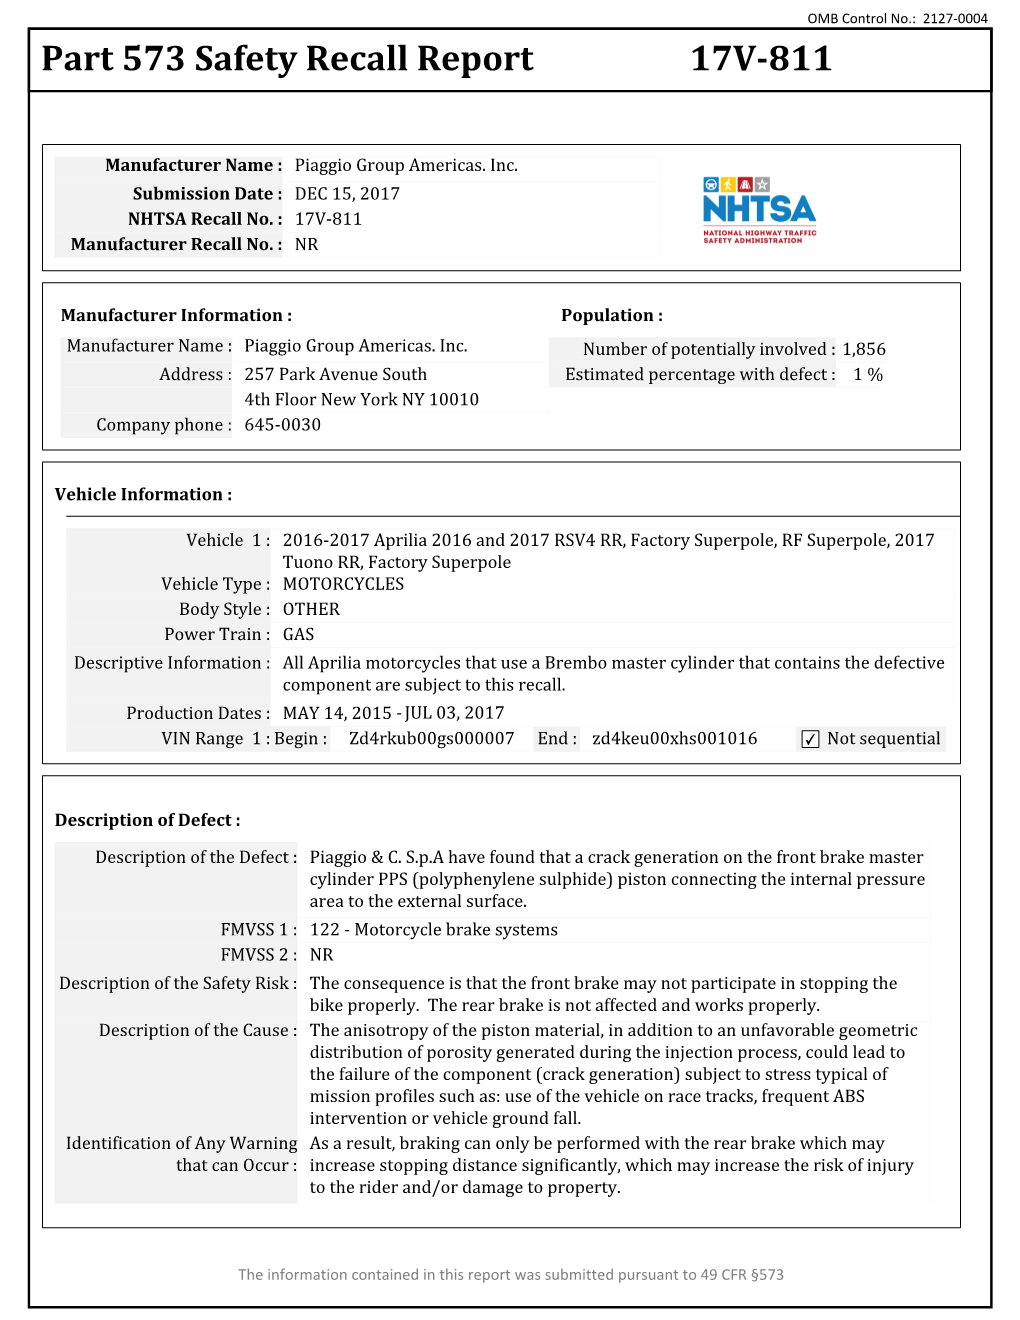 Part 573 Safety Recall Report 17V-811